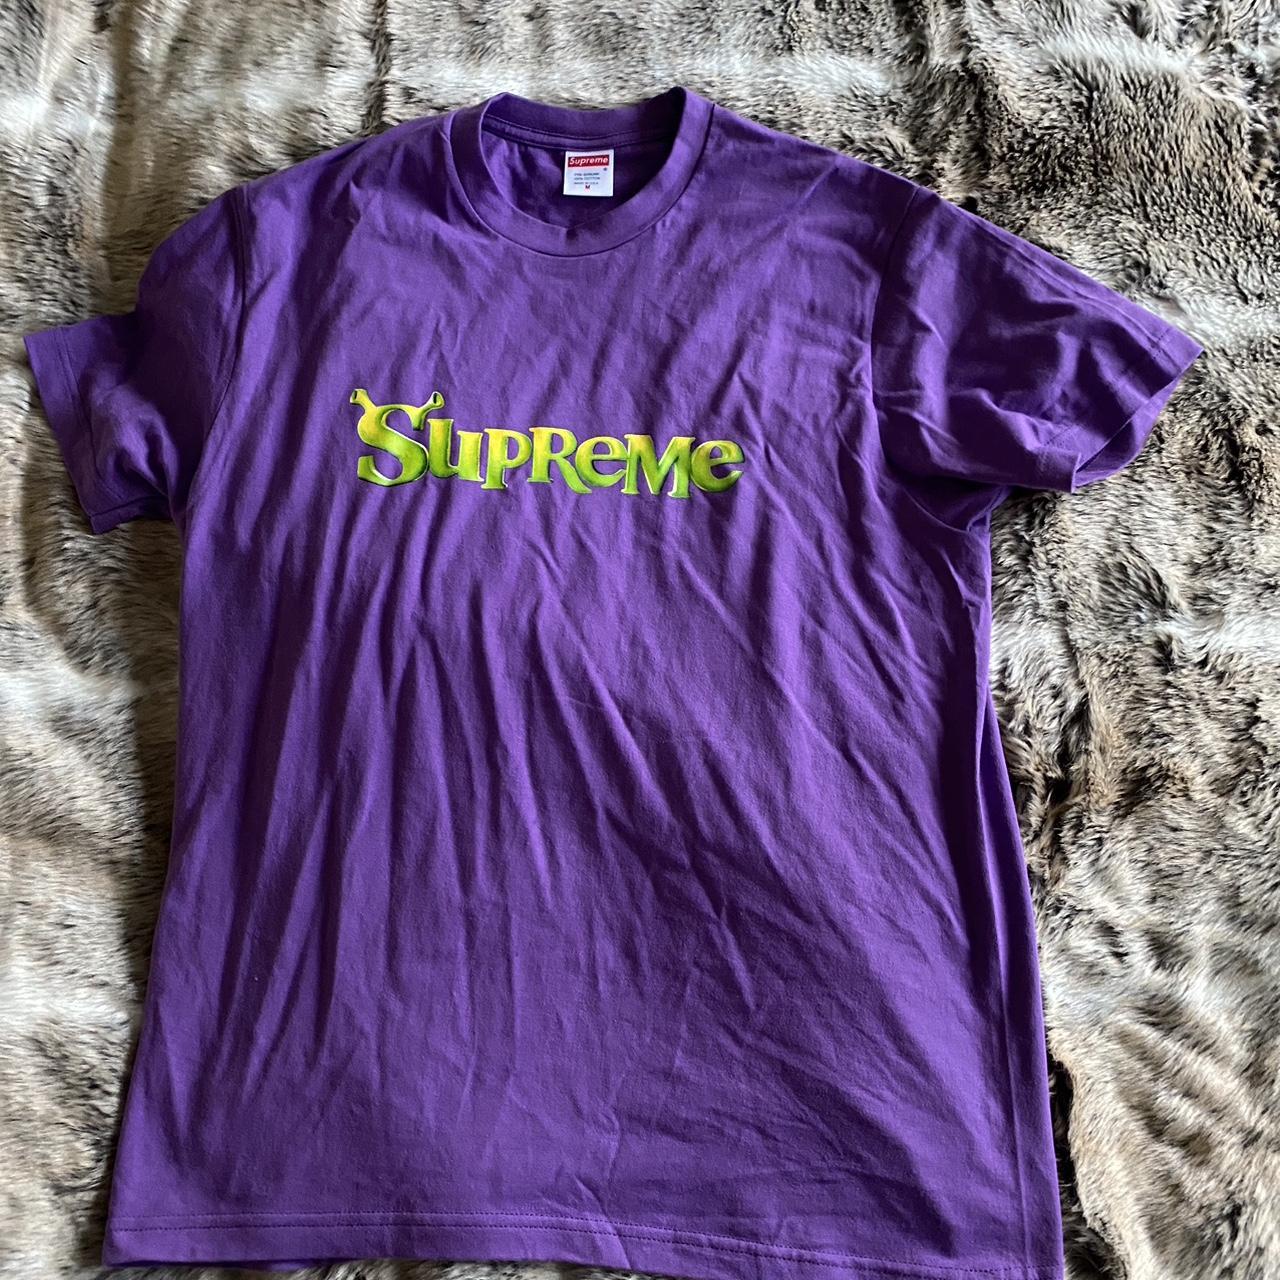 Supreme x shrek tee, size M almost perfect condition... - Depop